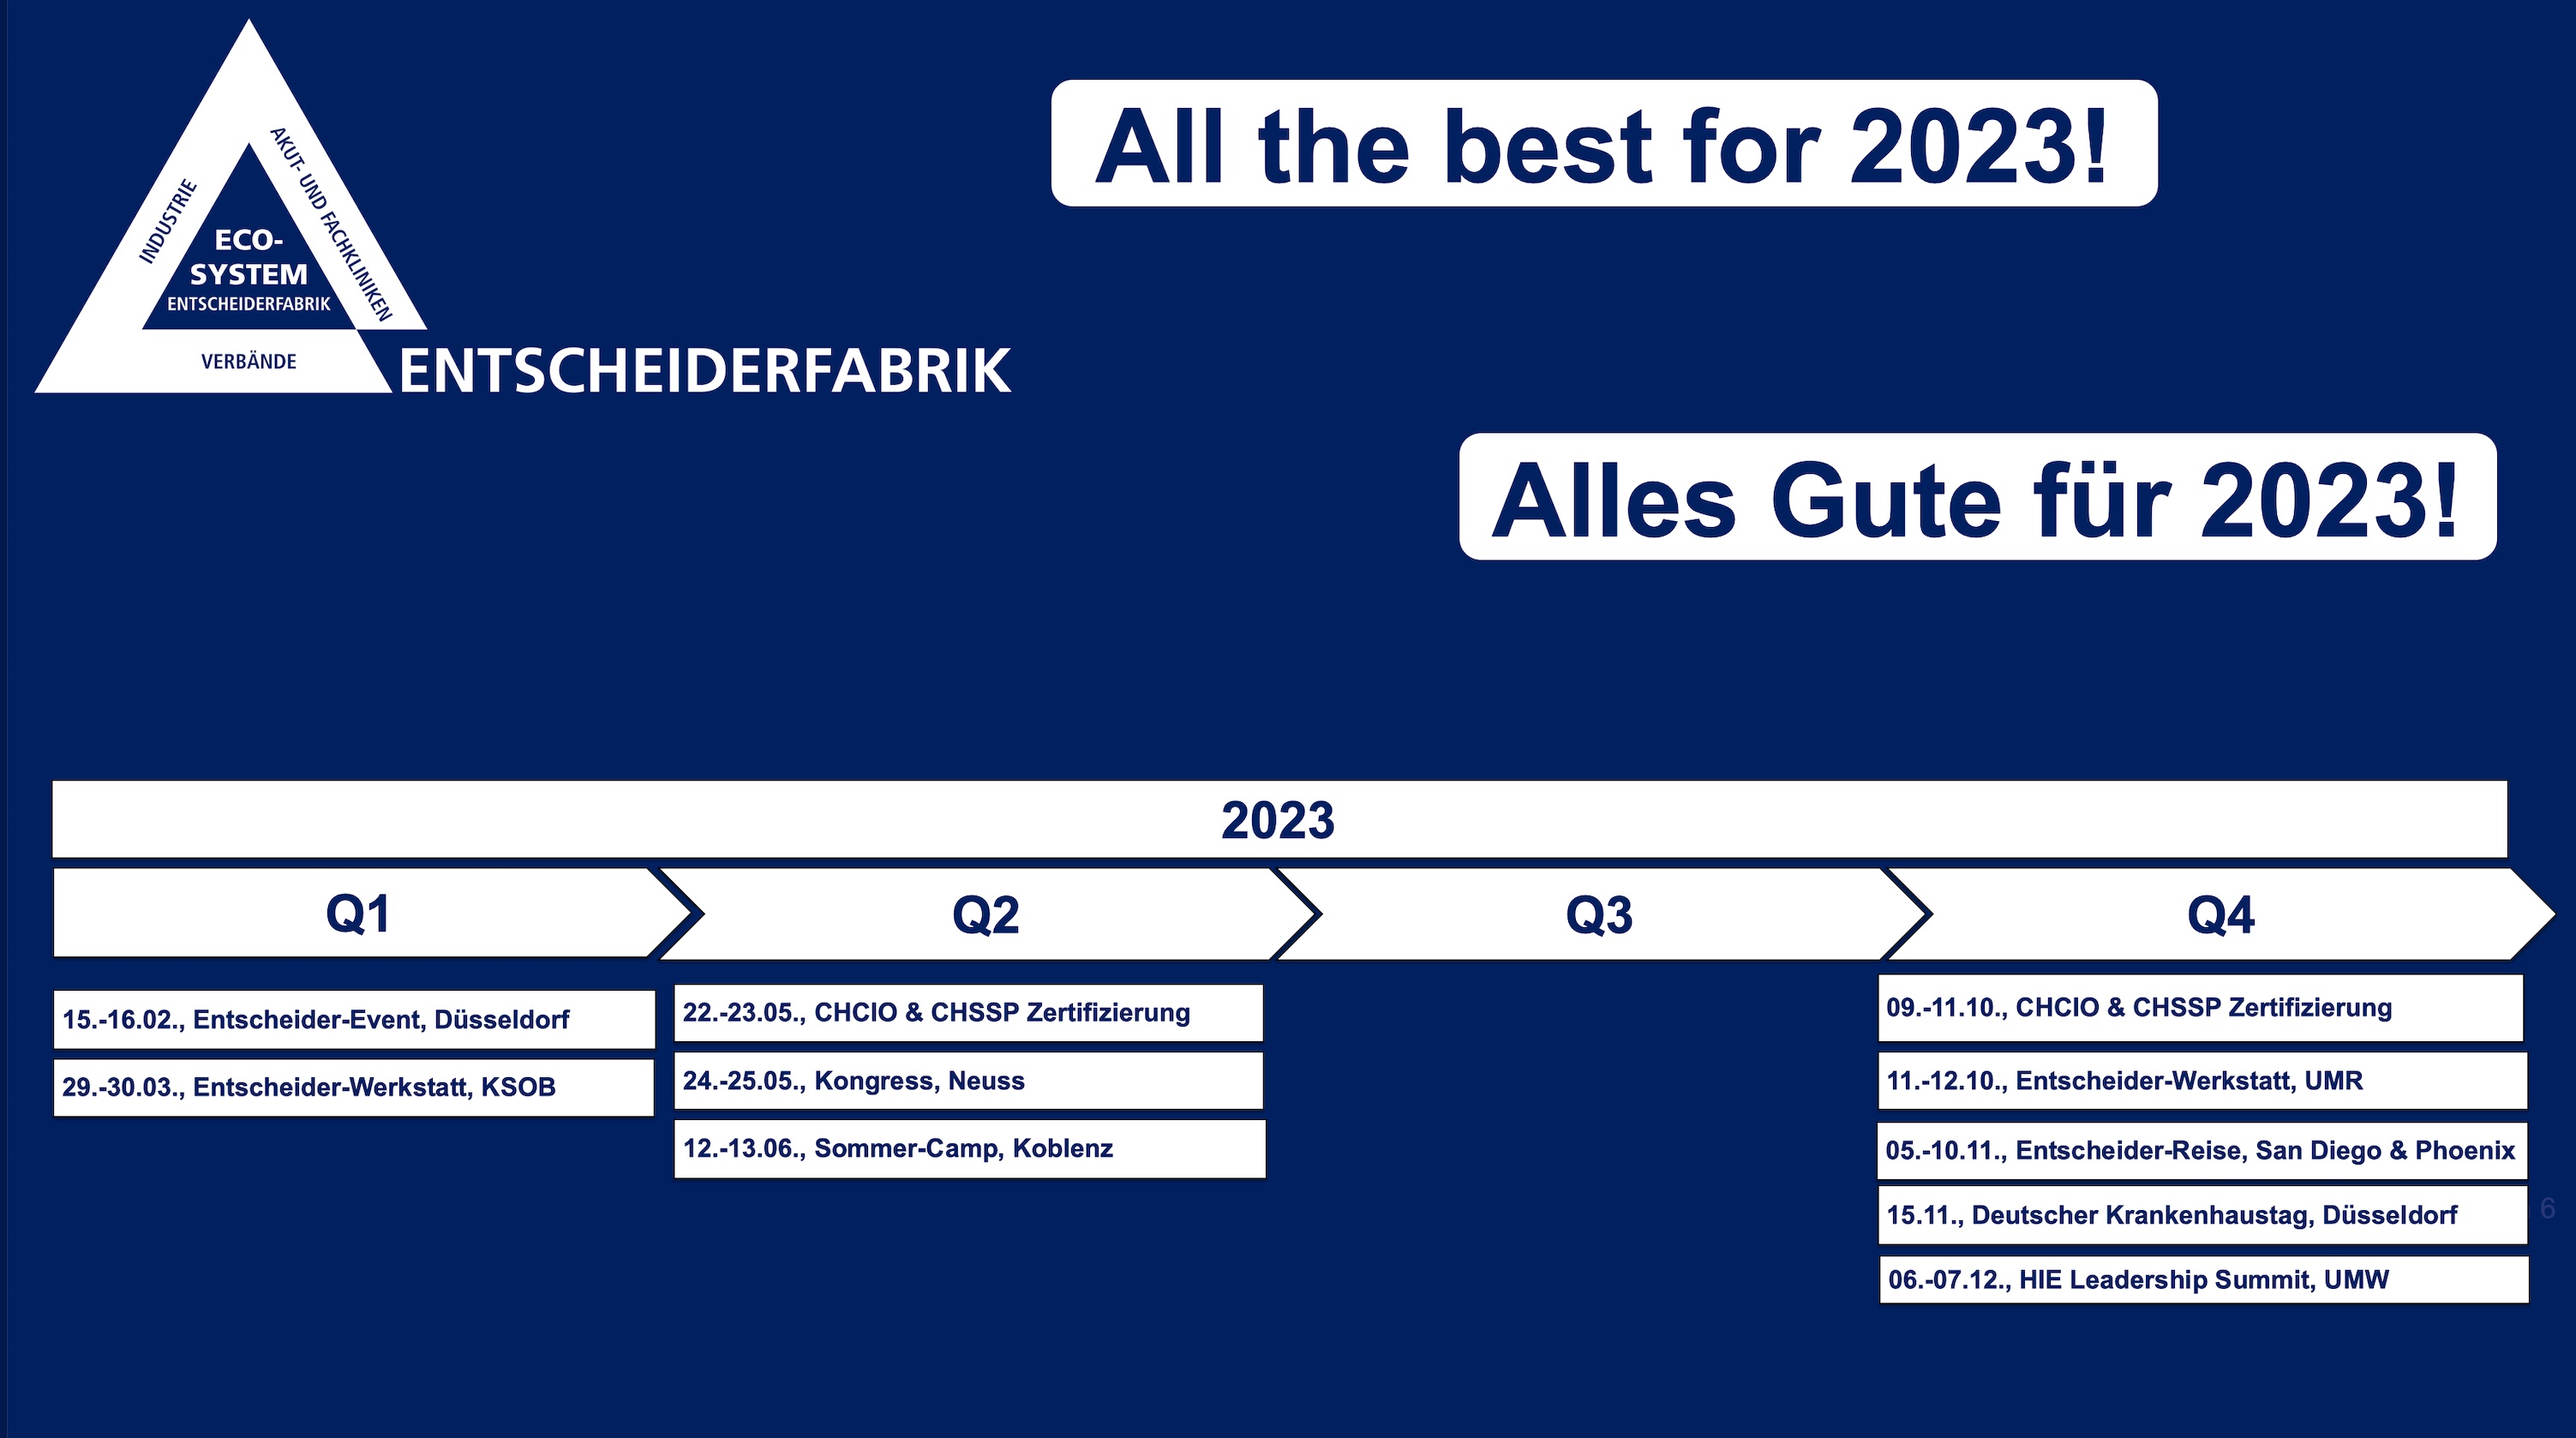 Alles Gute fuer 2023